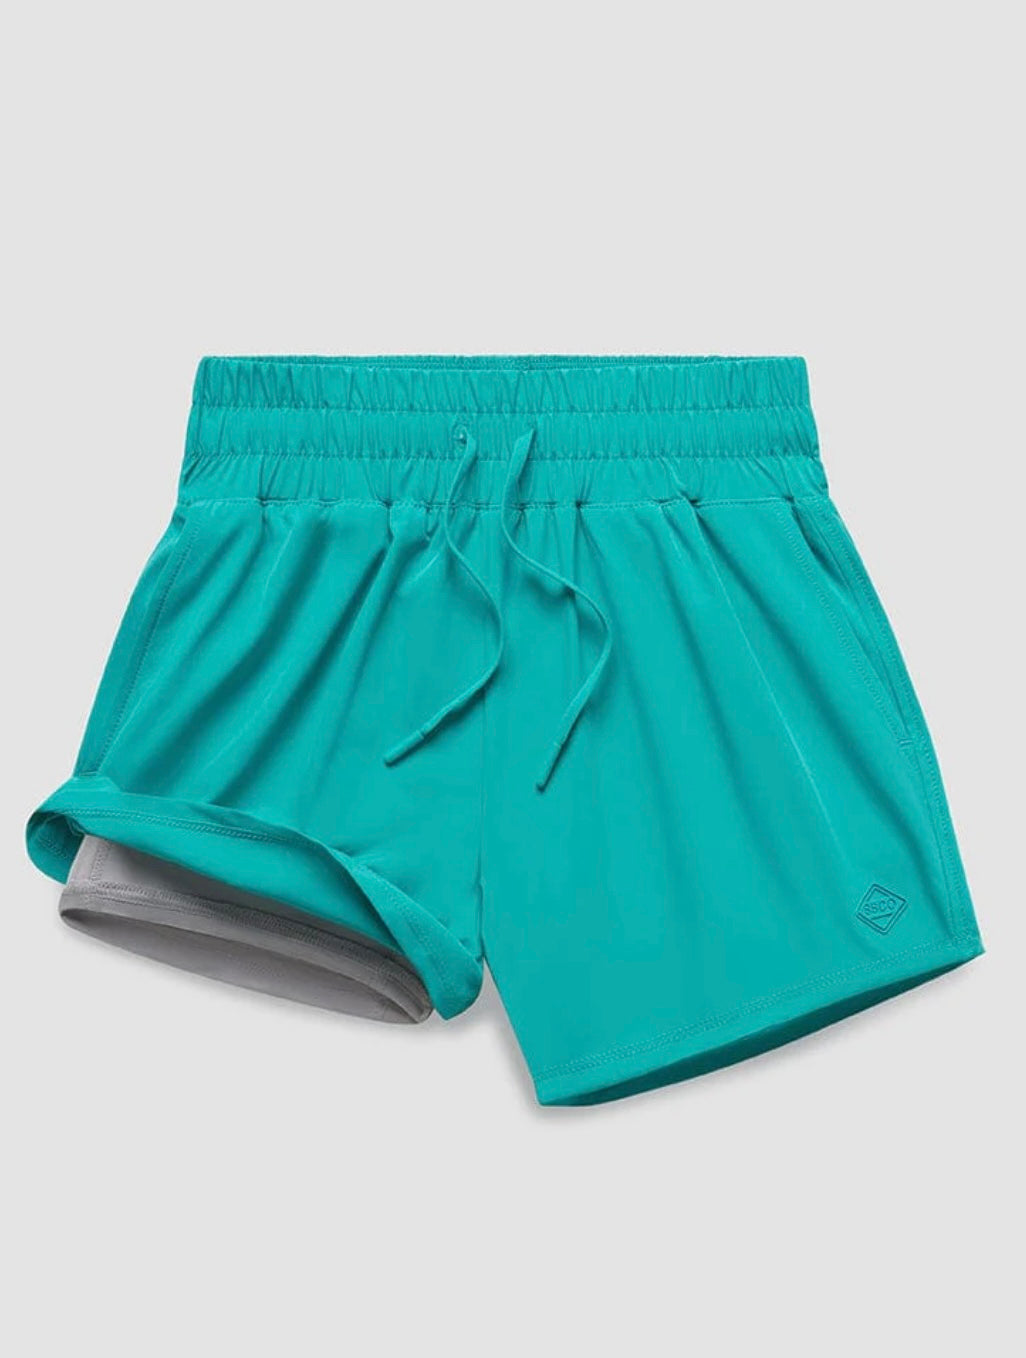 Women’s Hybrid Shorts in Emerald City by Southern Shirt Co.